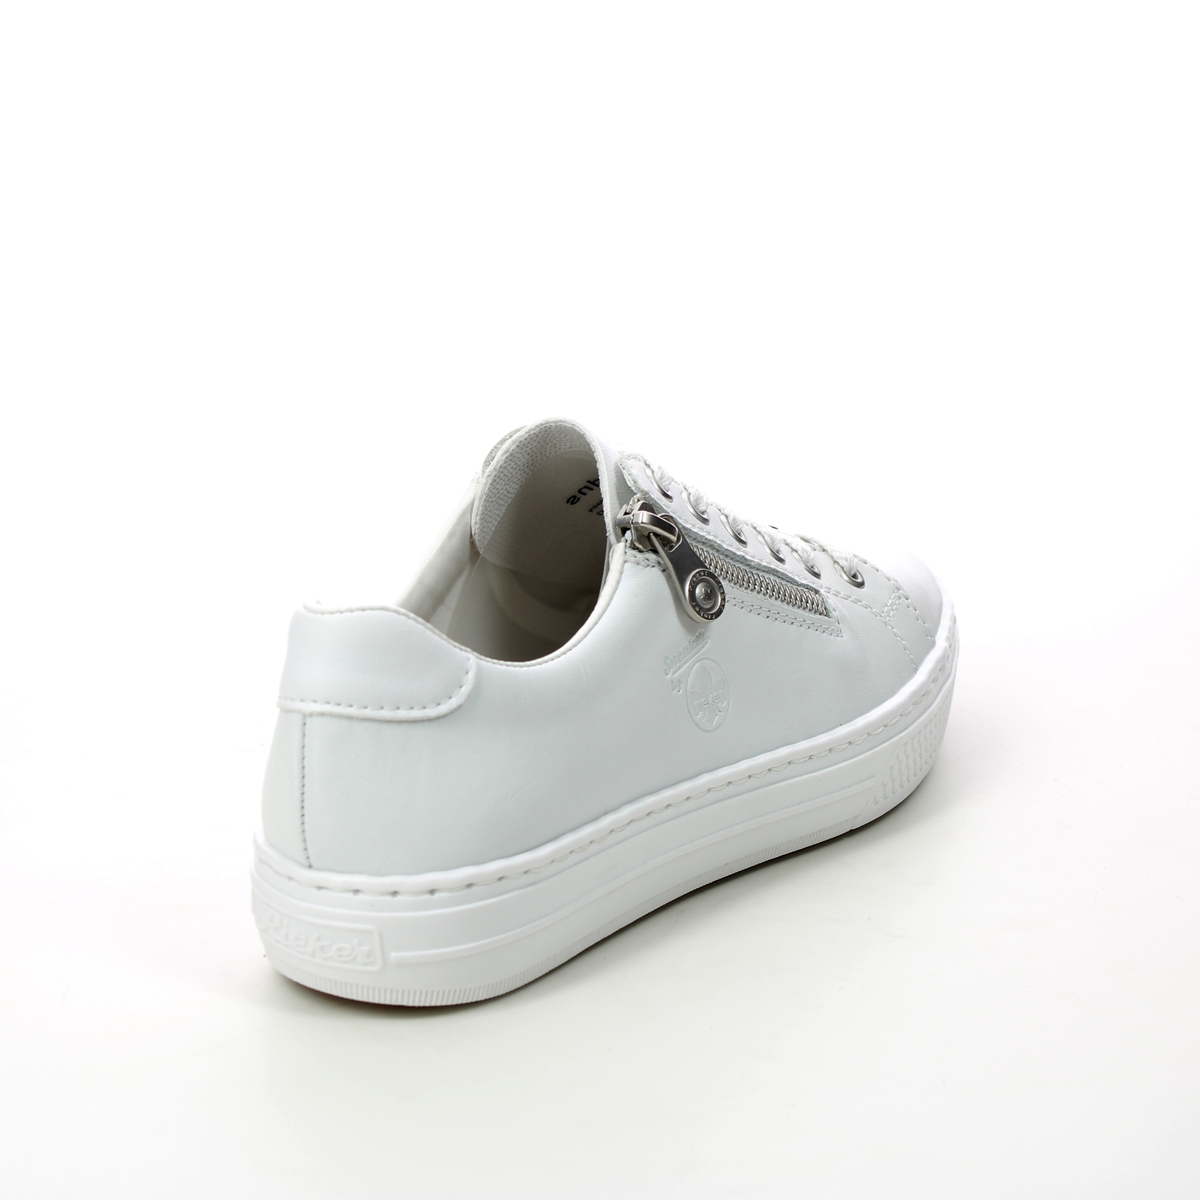 Rieker L59L1-83 WHITE LEATHER Womens trainers